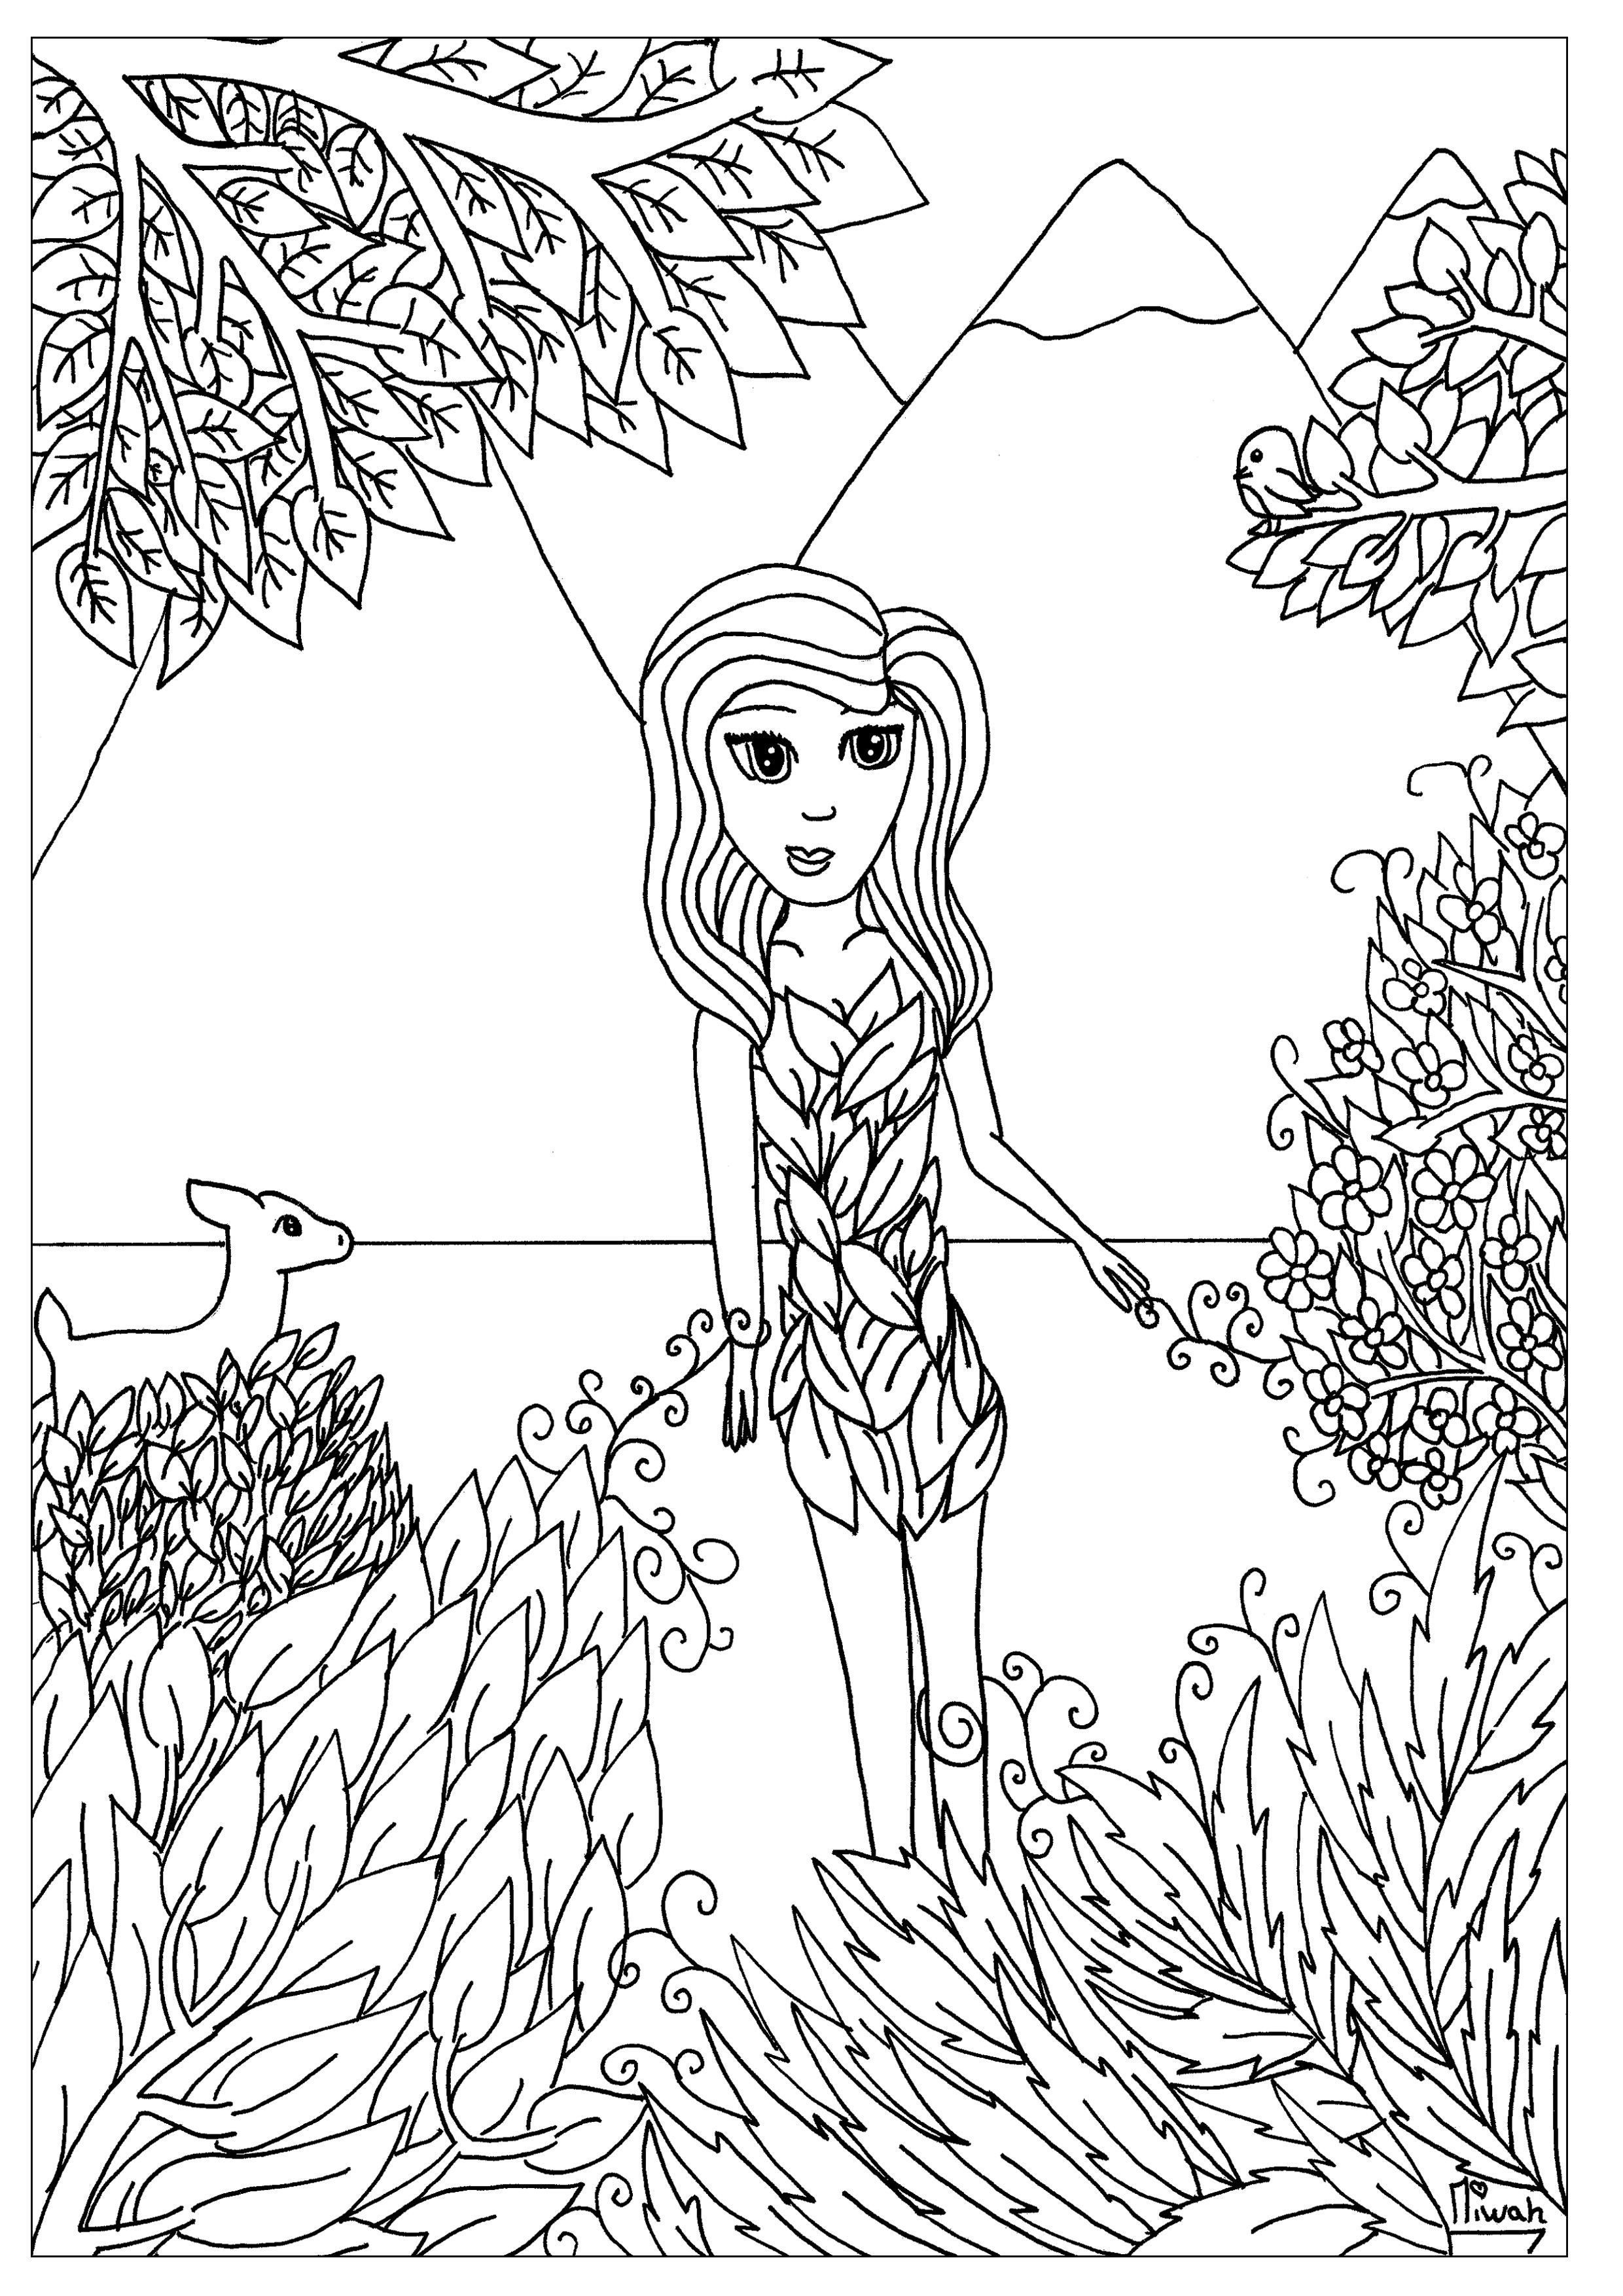 Flower girl, a cute and simple coloring page